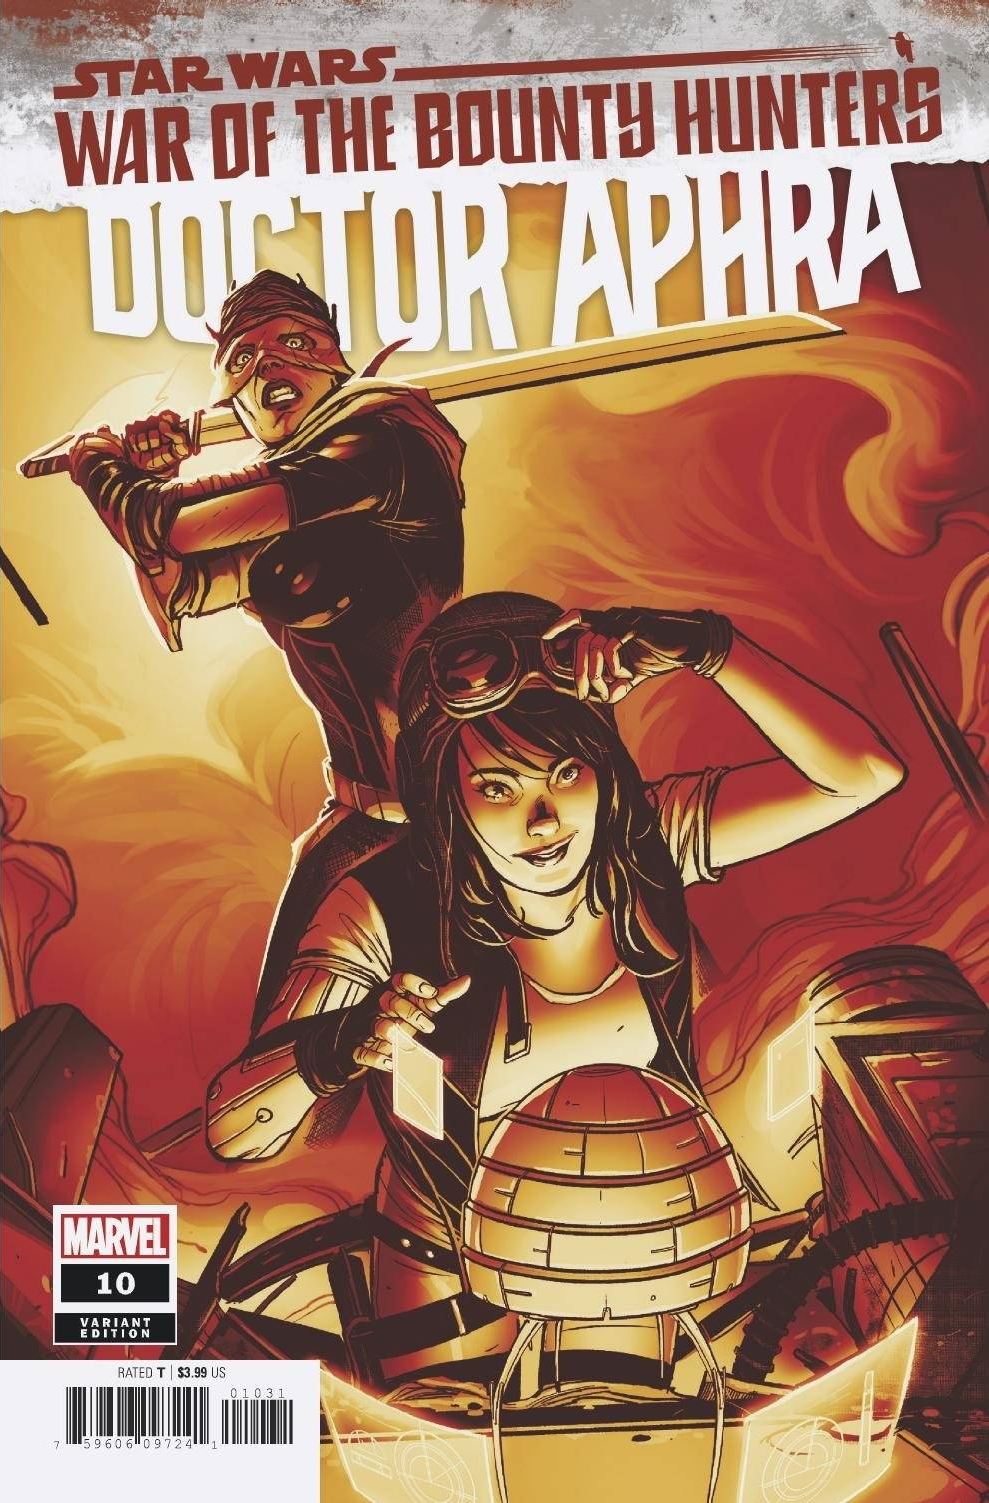 Doctor Aphra #10 (Sway Crimson Variant Cover) (26.05.2021)